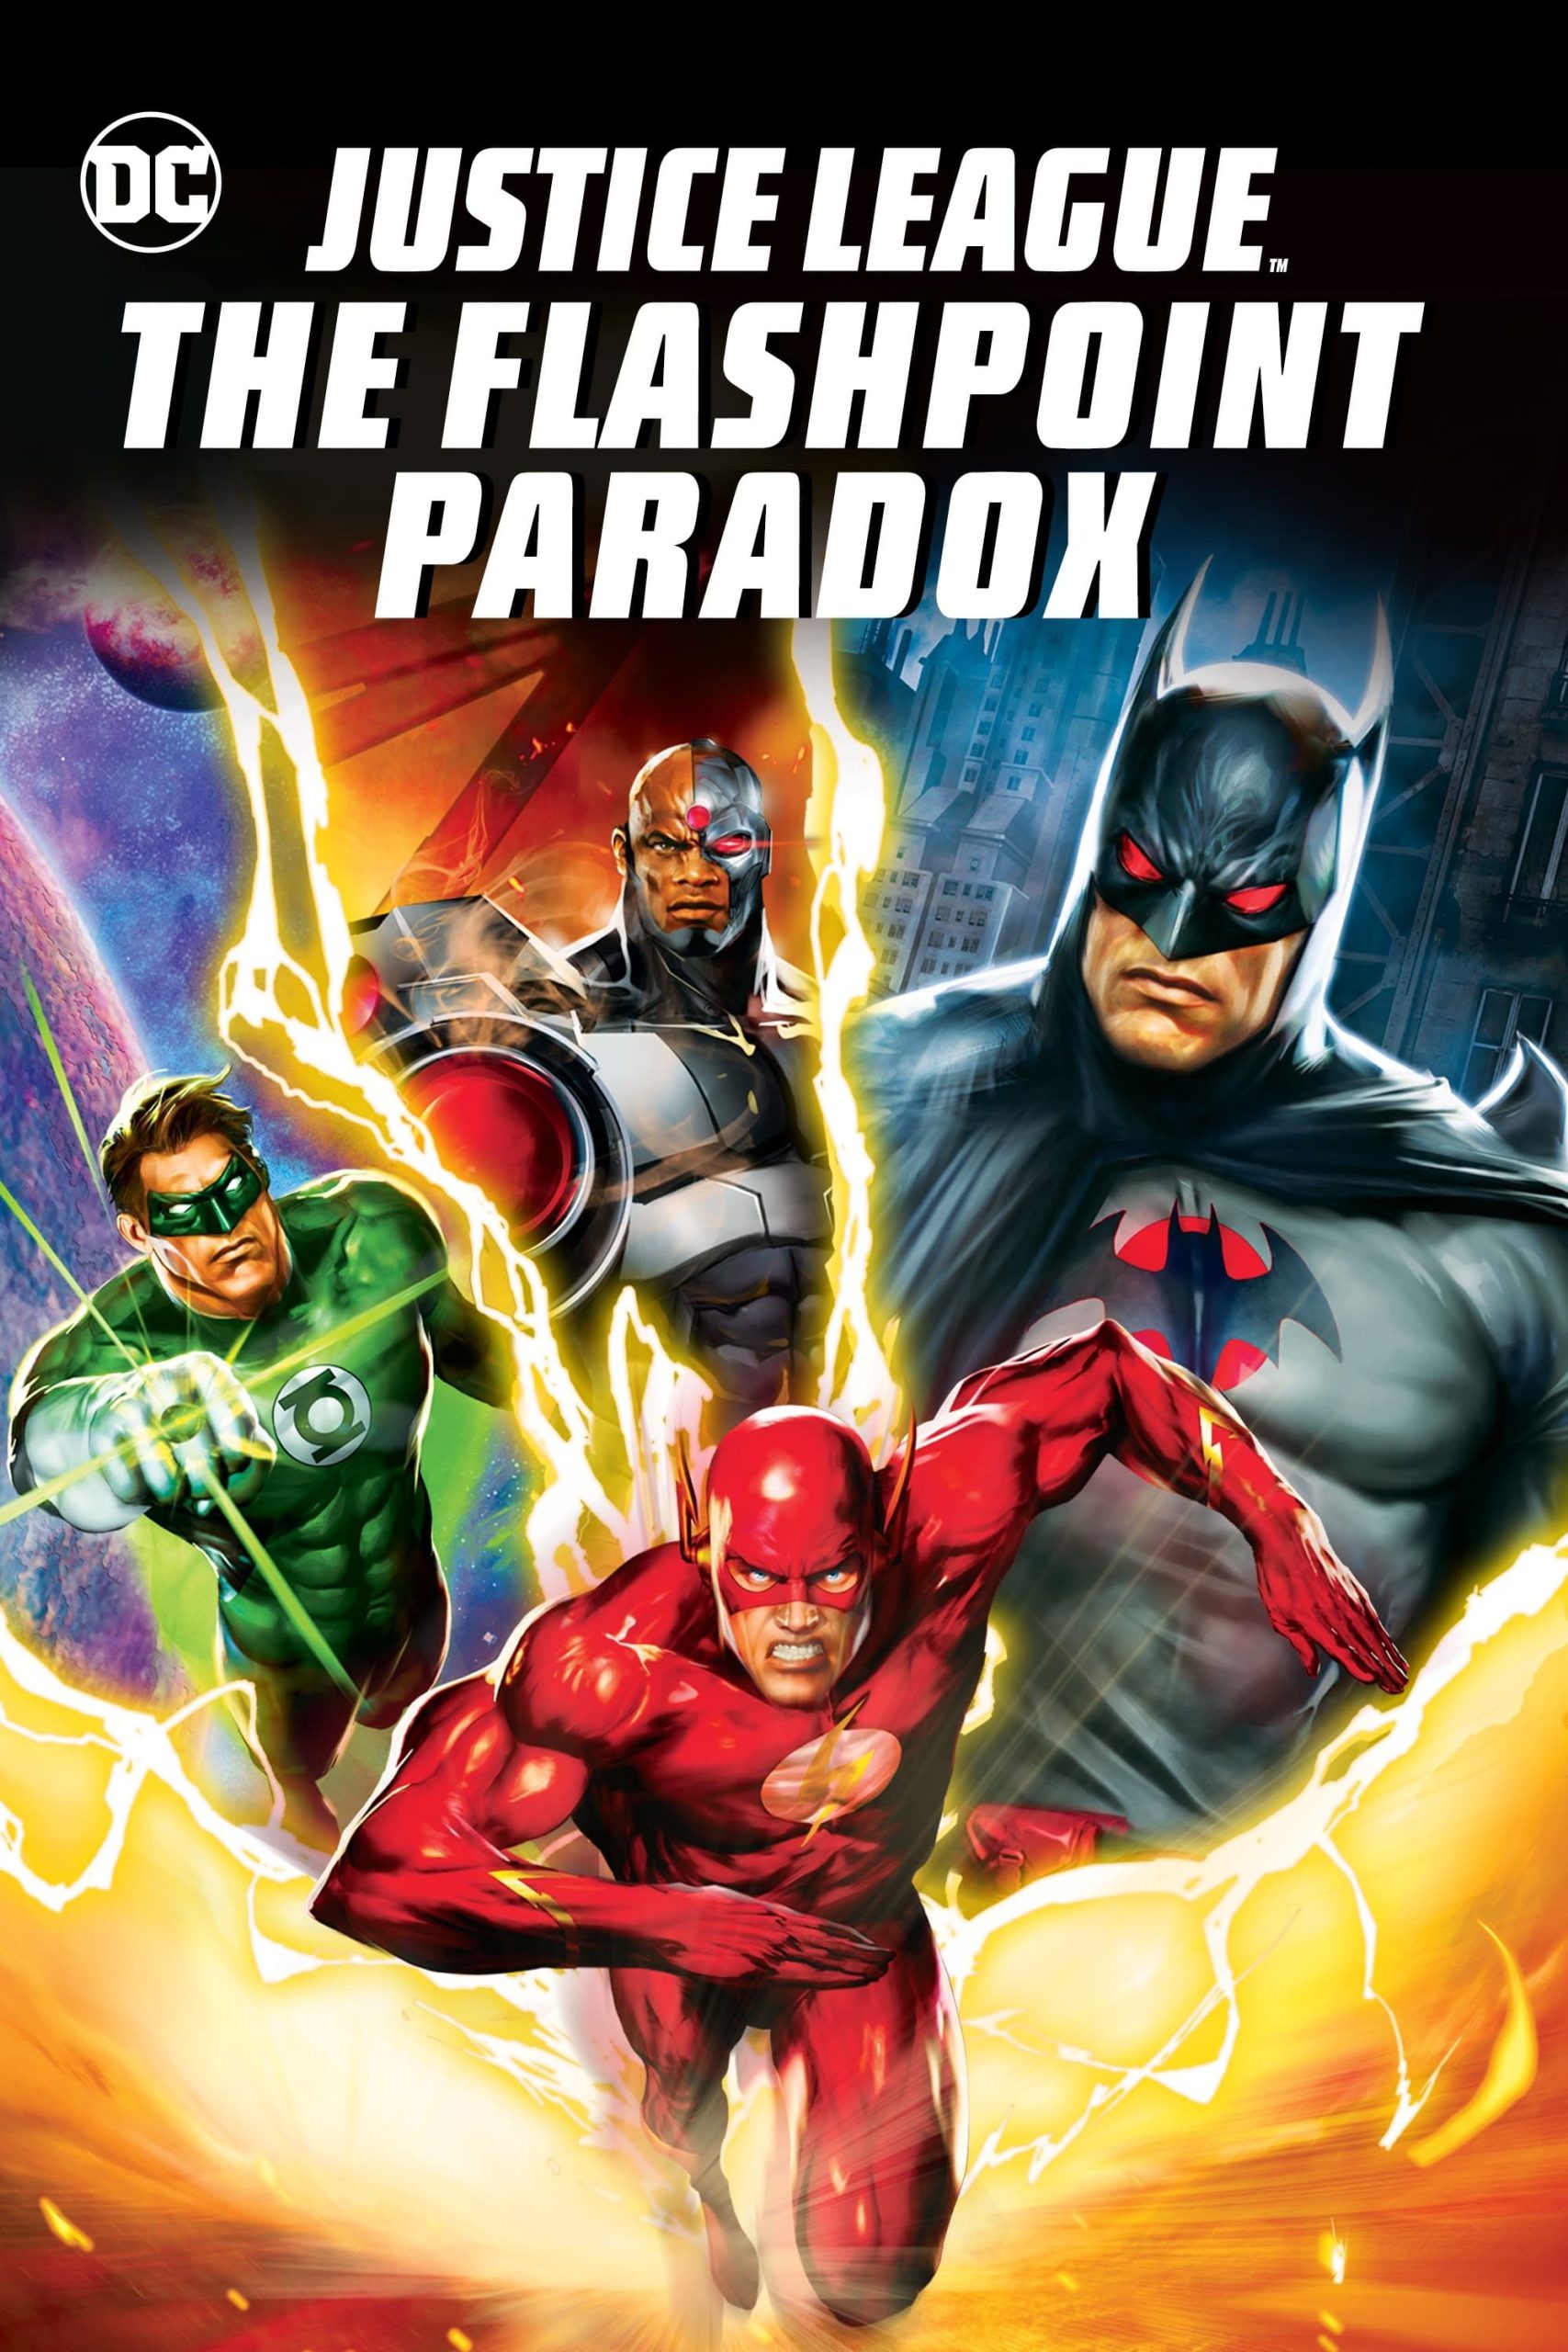 Justice League: The Flashpoint Paradox [Sub-ITA] [HD] (2013)